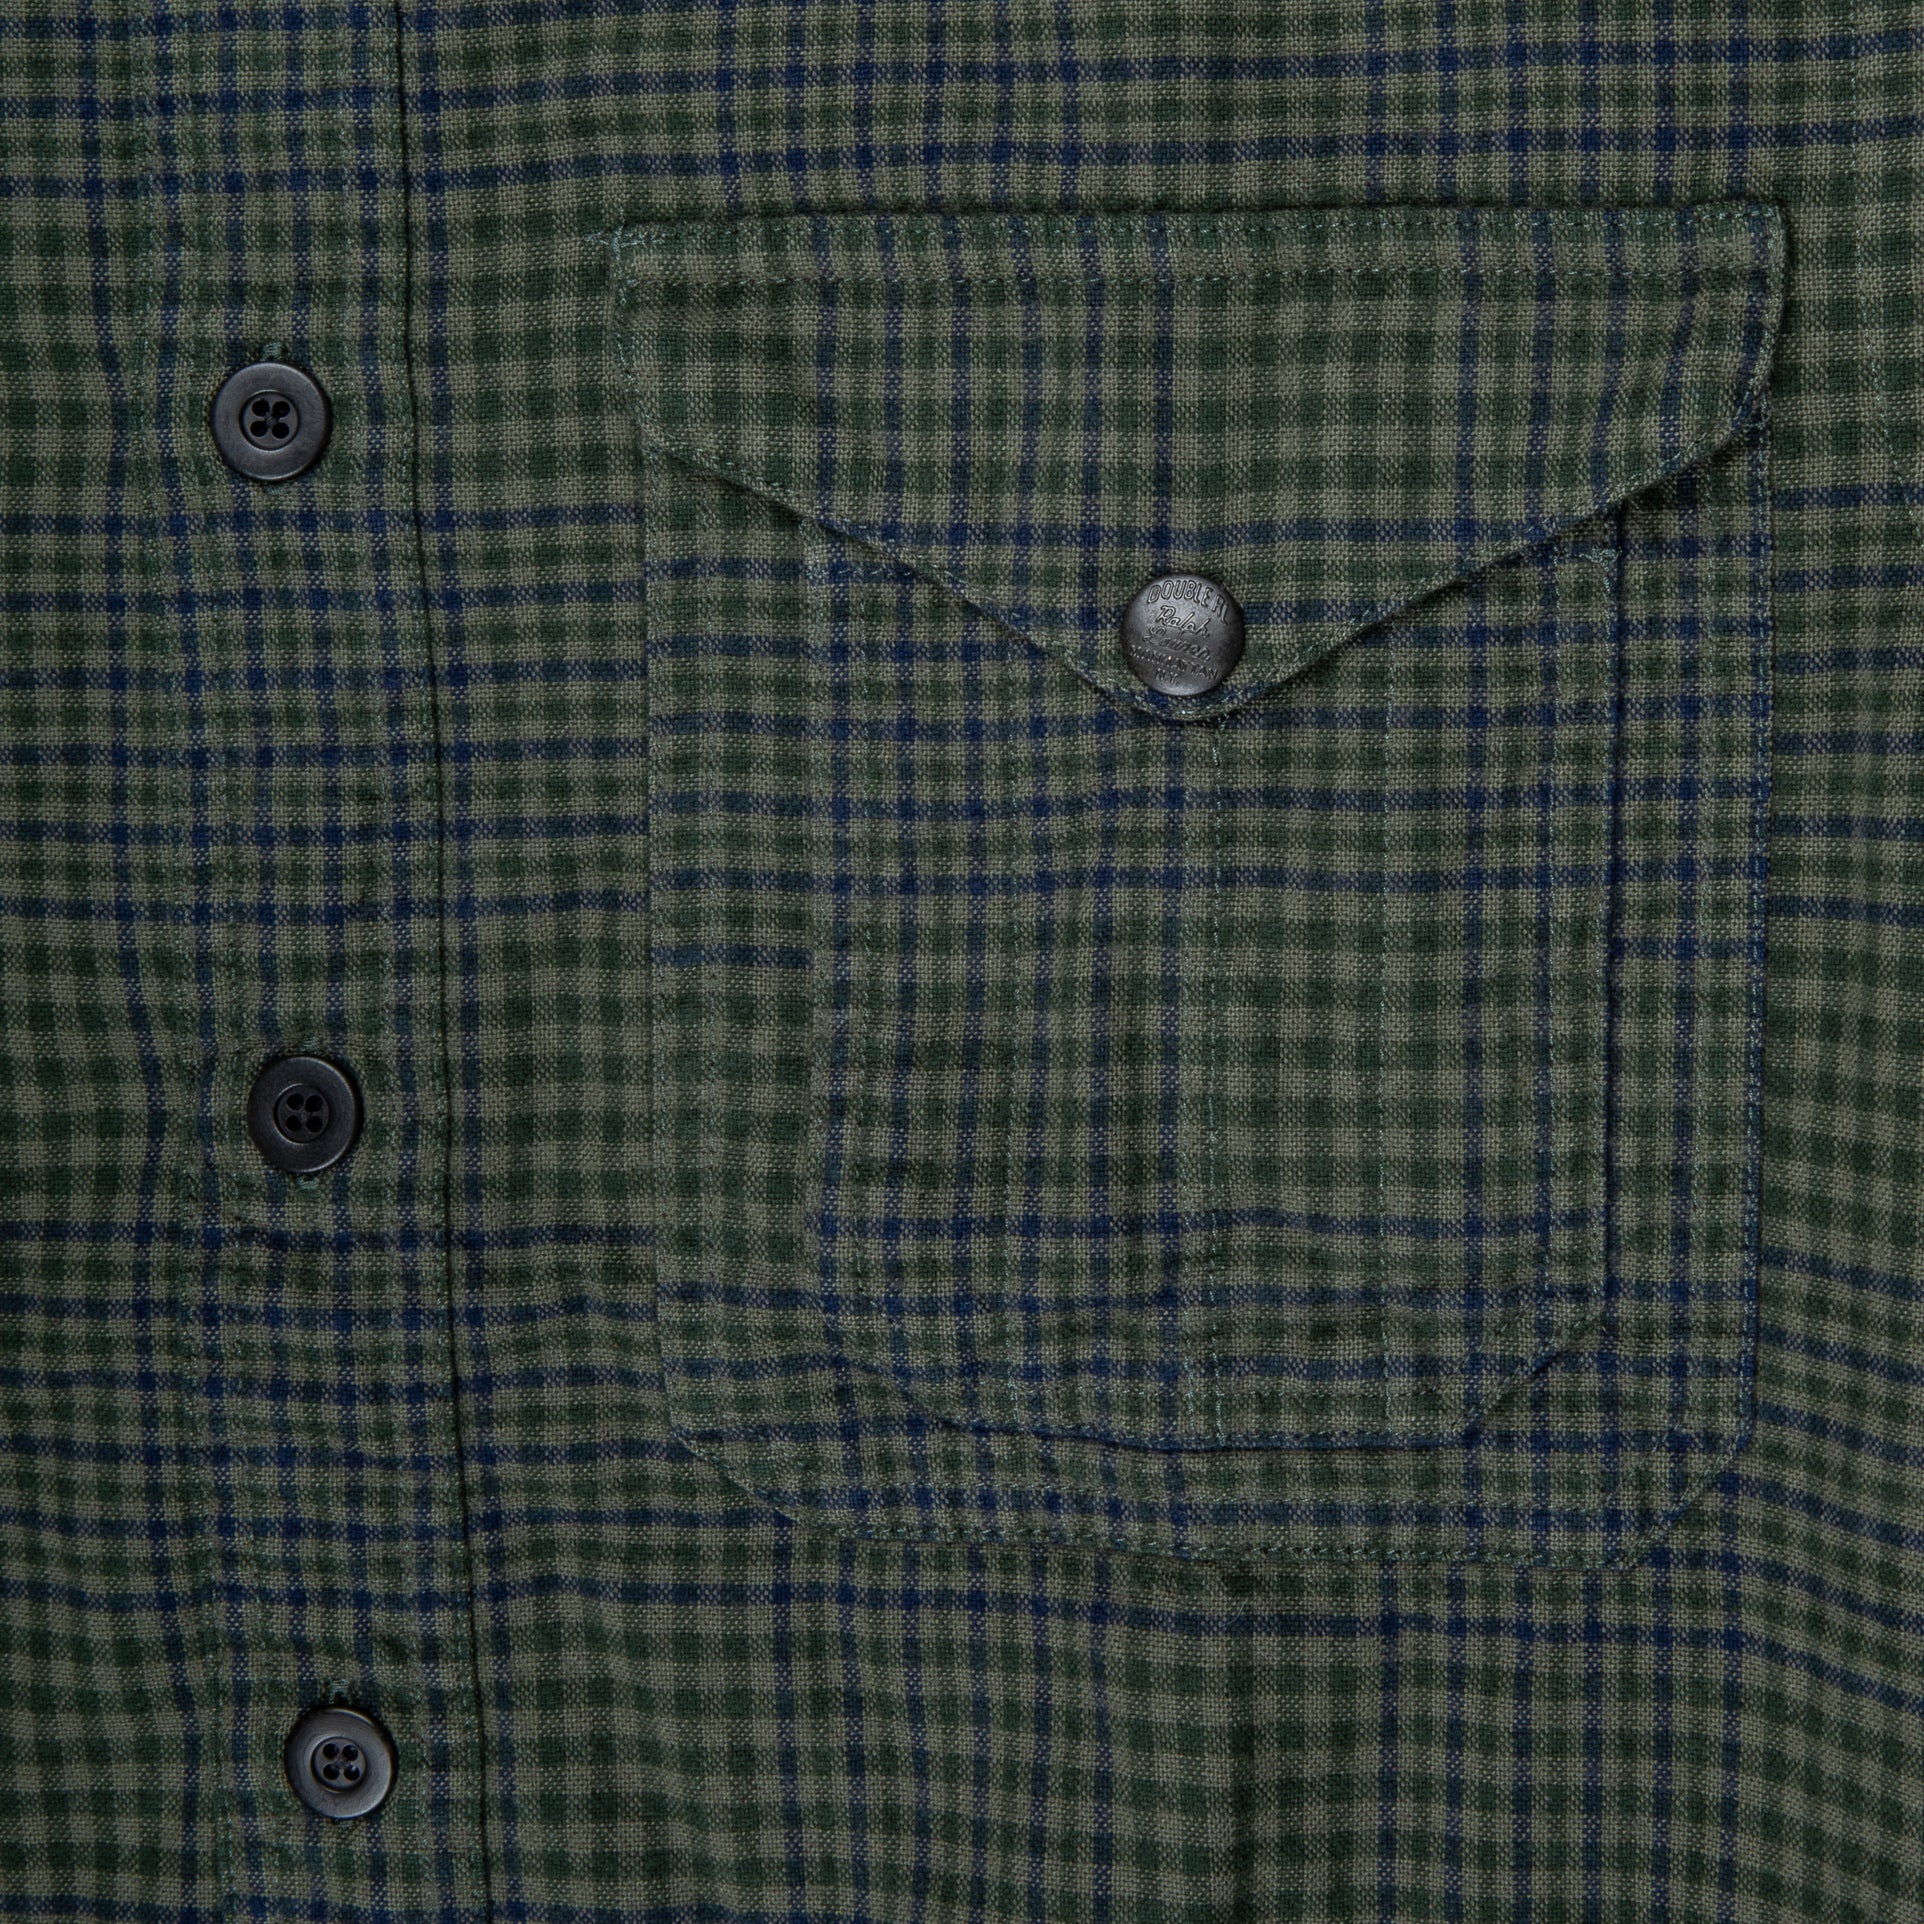 Snapped chest pocket detail